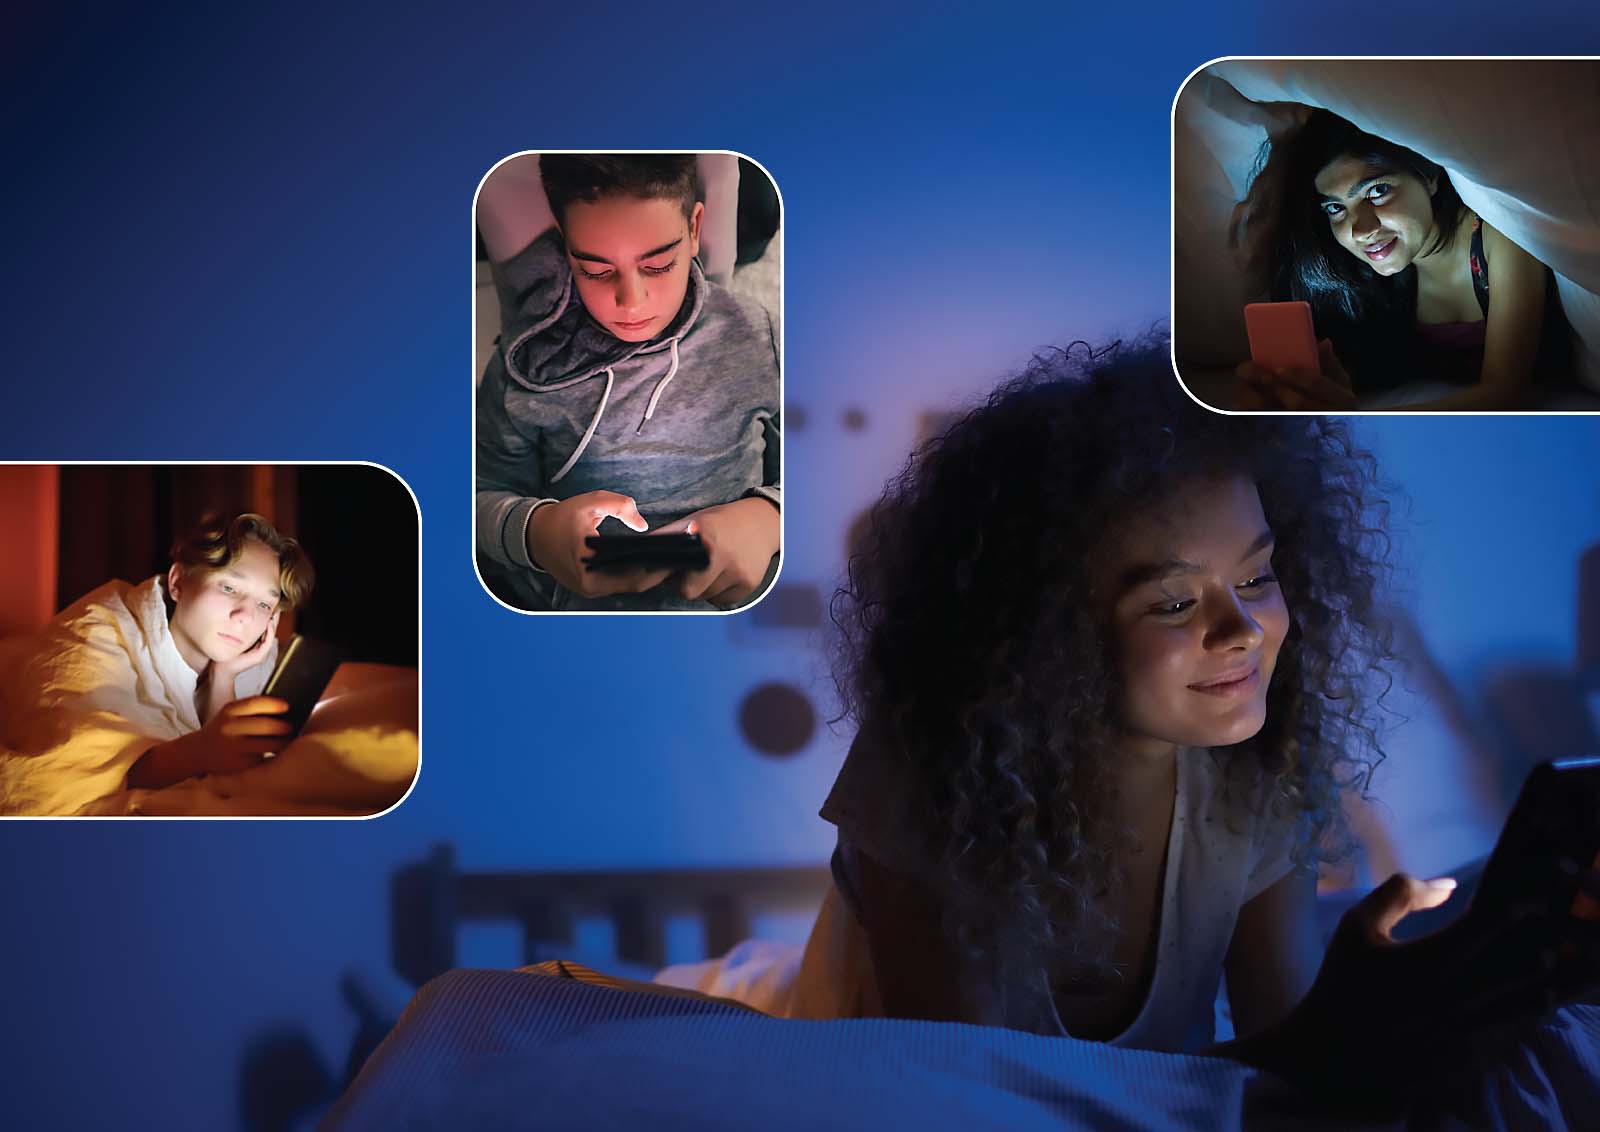 A collage of several teenagers on electronic devices before bedtime.